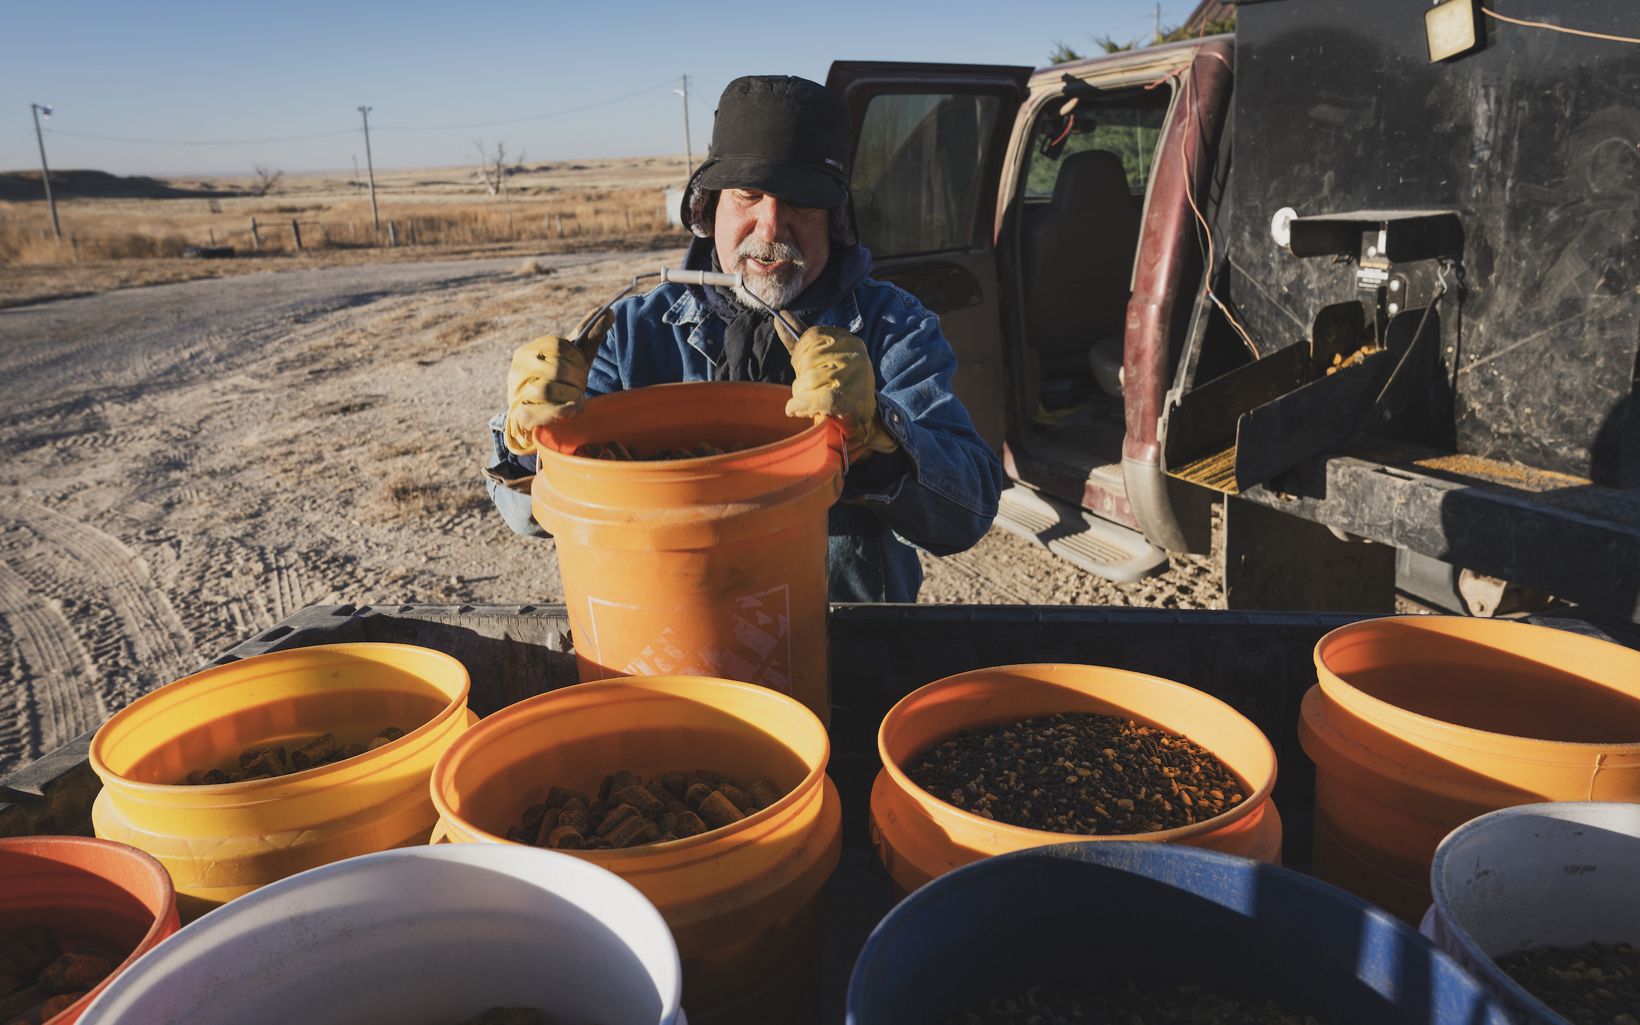 Prepping Feed Treg Hatcher prepares feed buckets for goats, cattle and horses during his morning chores. © Morgan Heim 